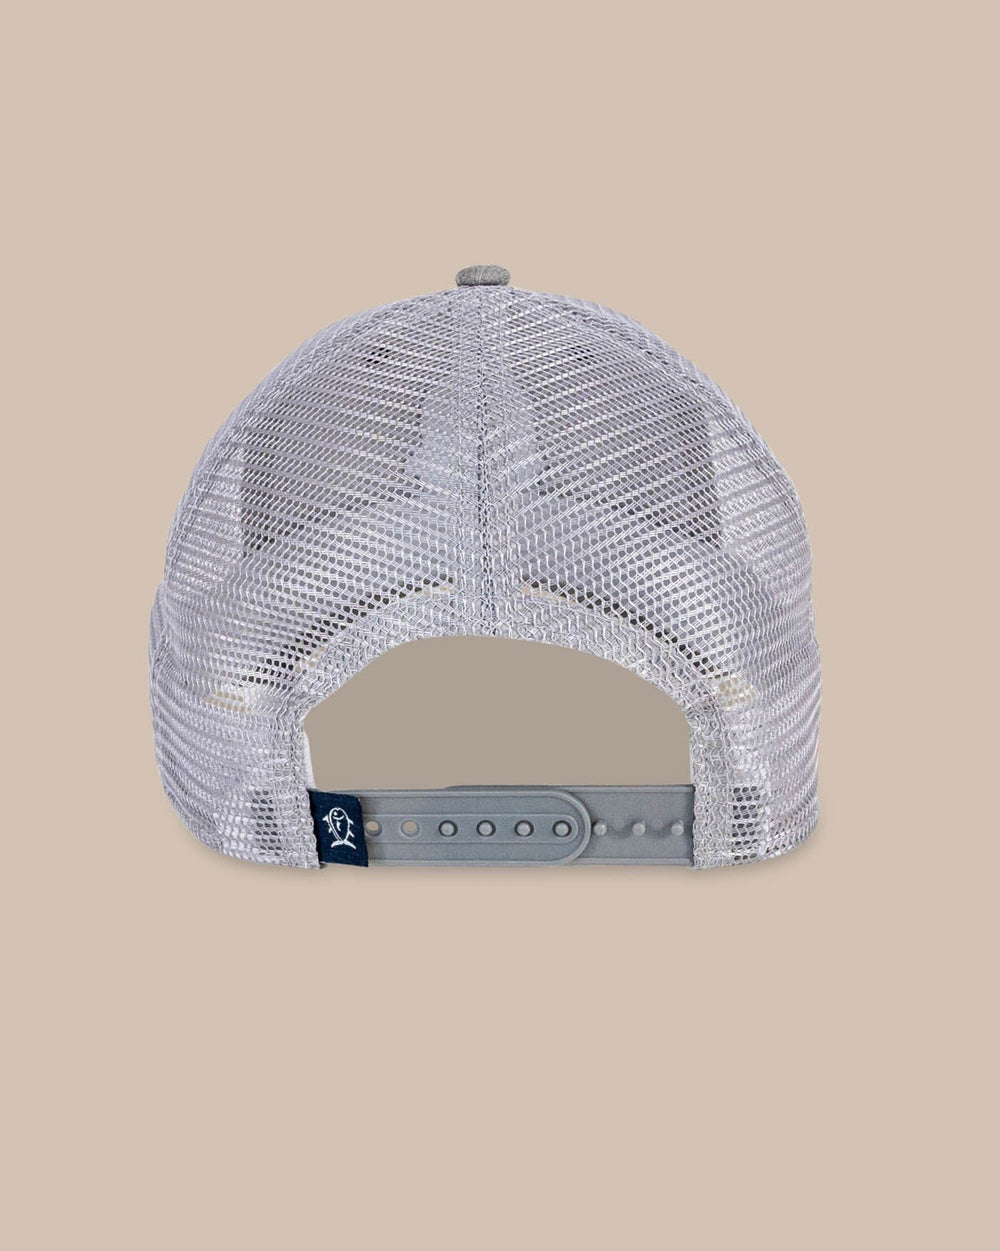 The back view of the Southern Tide Three Palms Performance Trucker Hat by Southern Tide - Heather Khaki